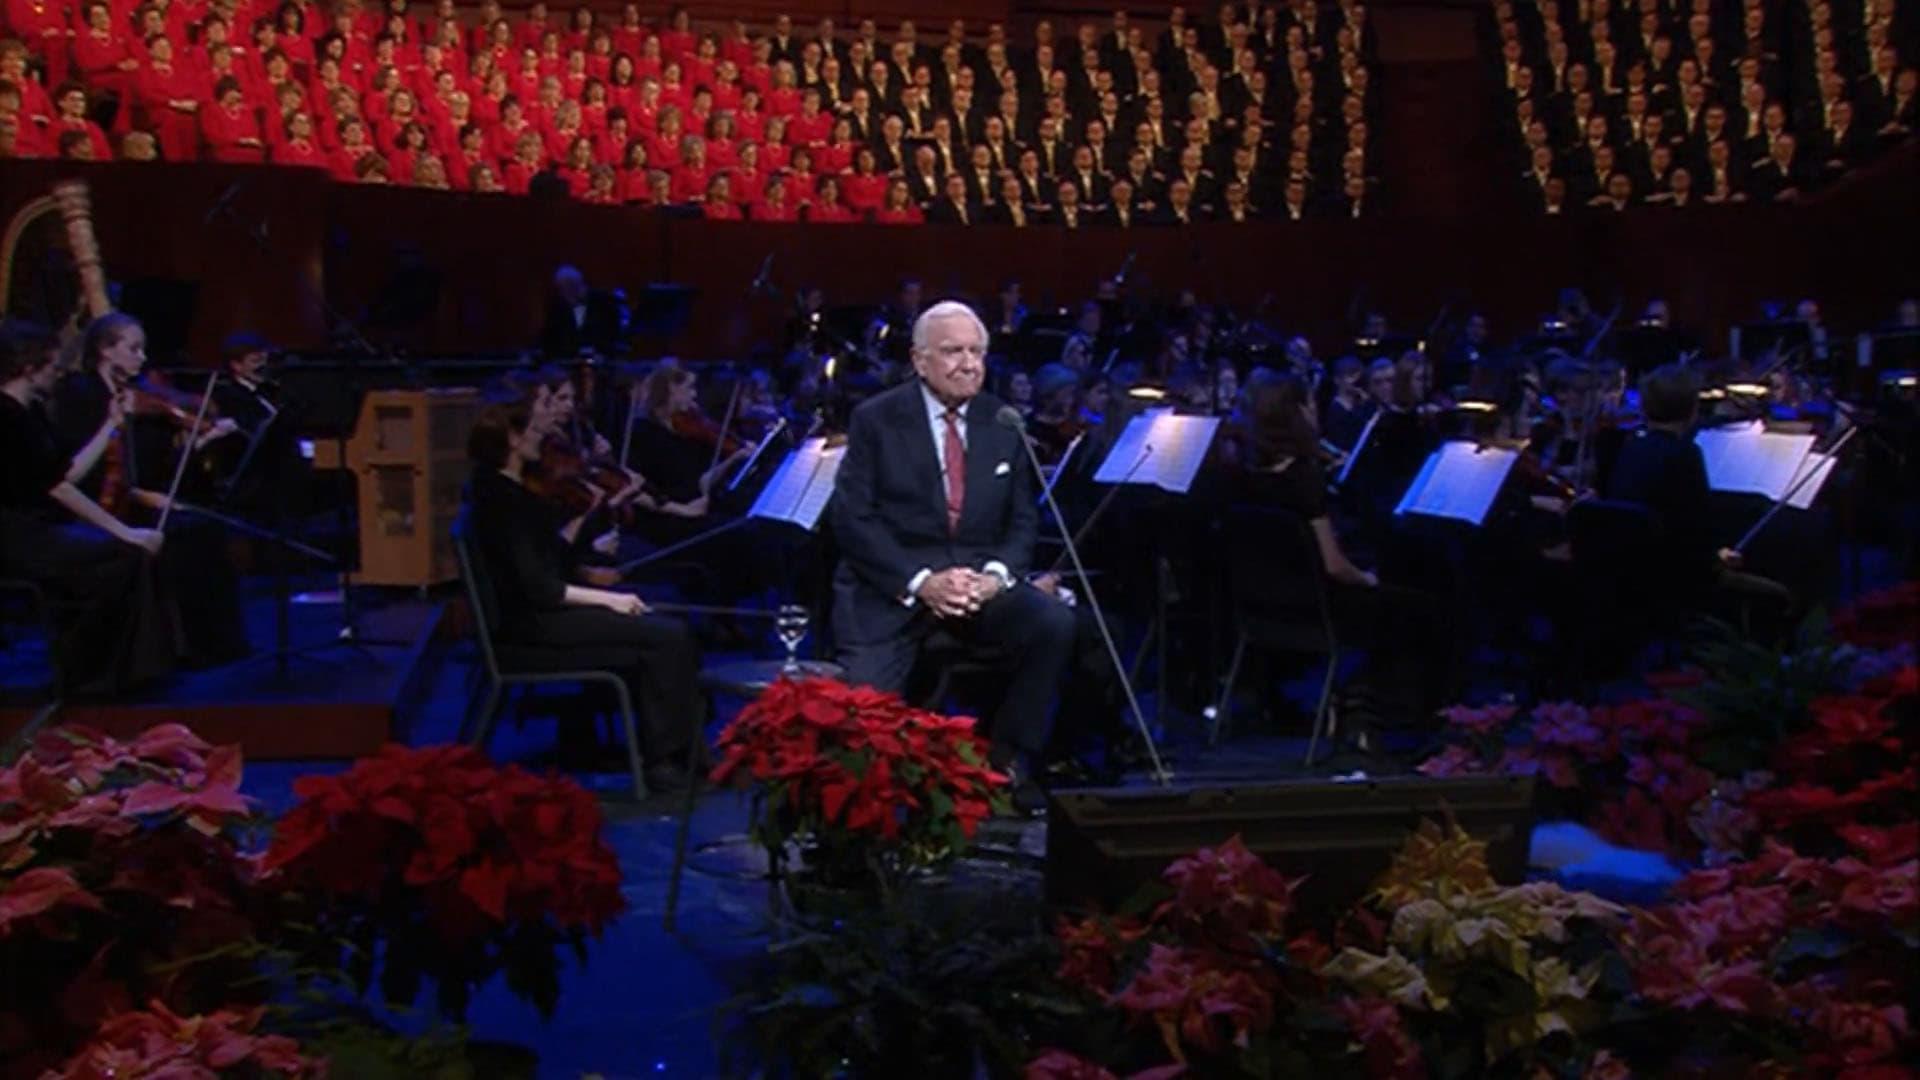 Silent Night, Holy Night with Walter Cronkite backdrop